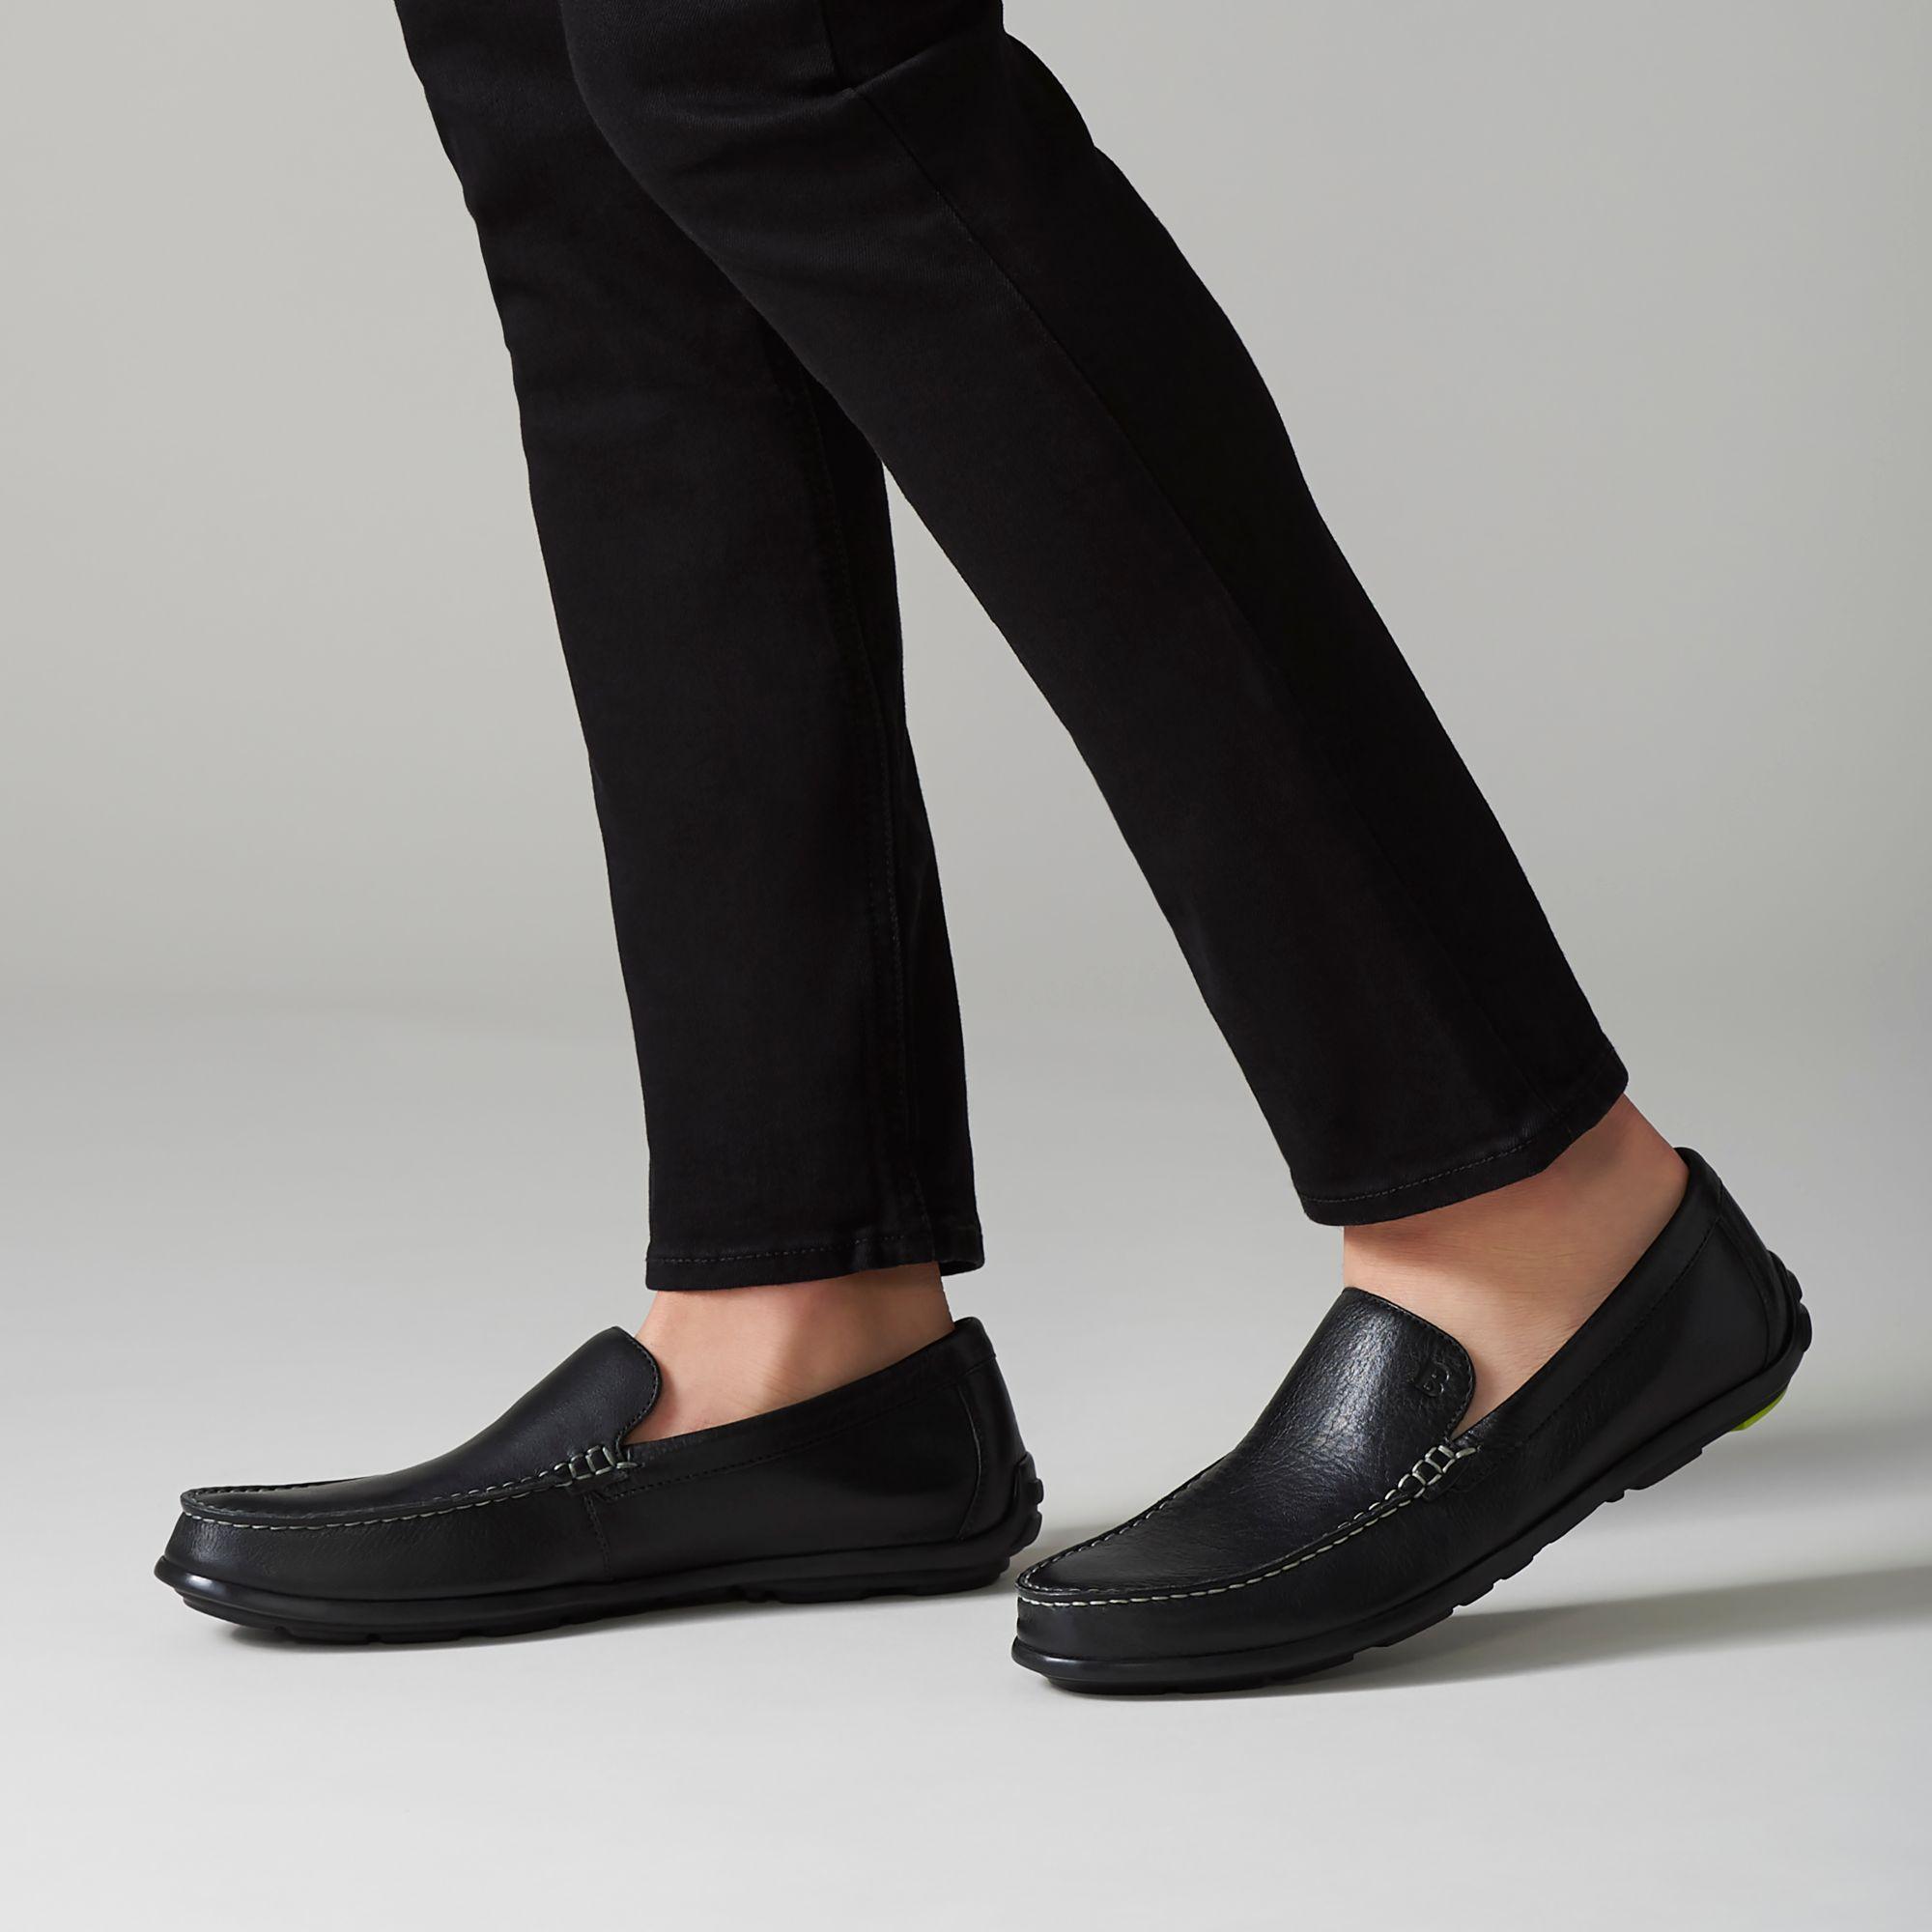 Clarks Leather Grafton Loafer in Black 